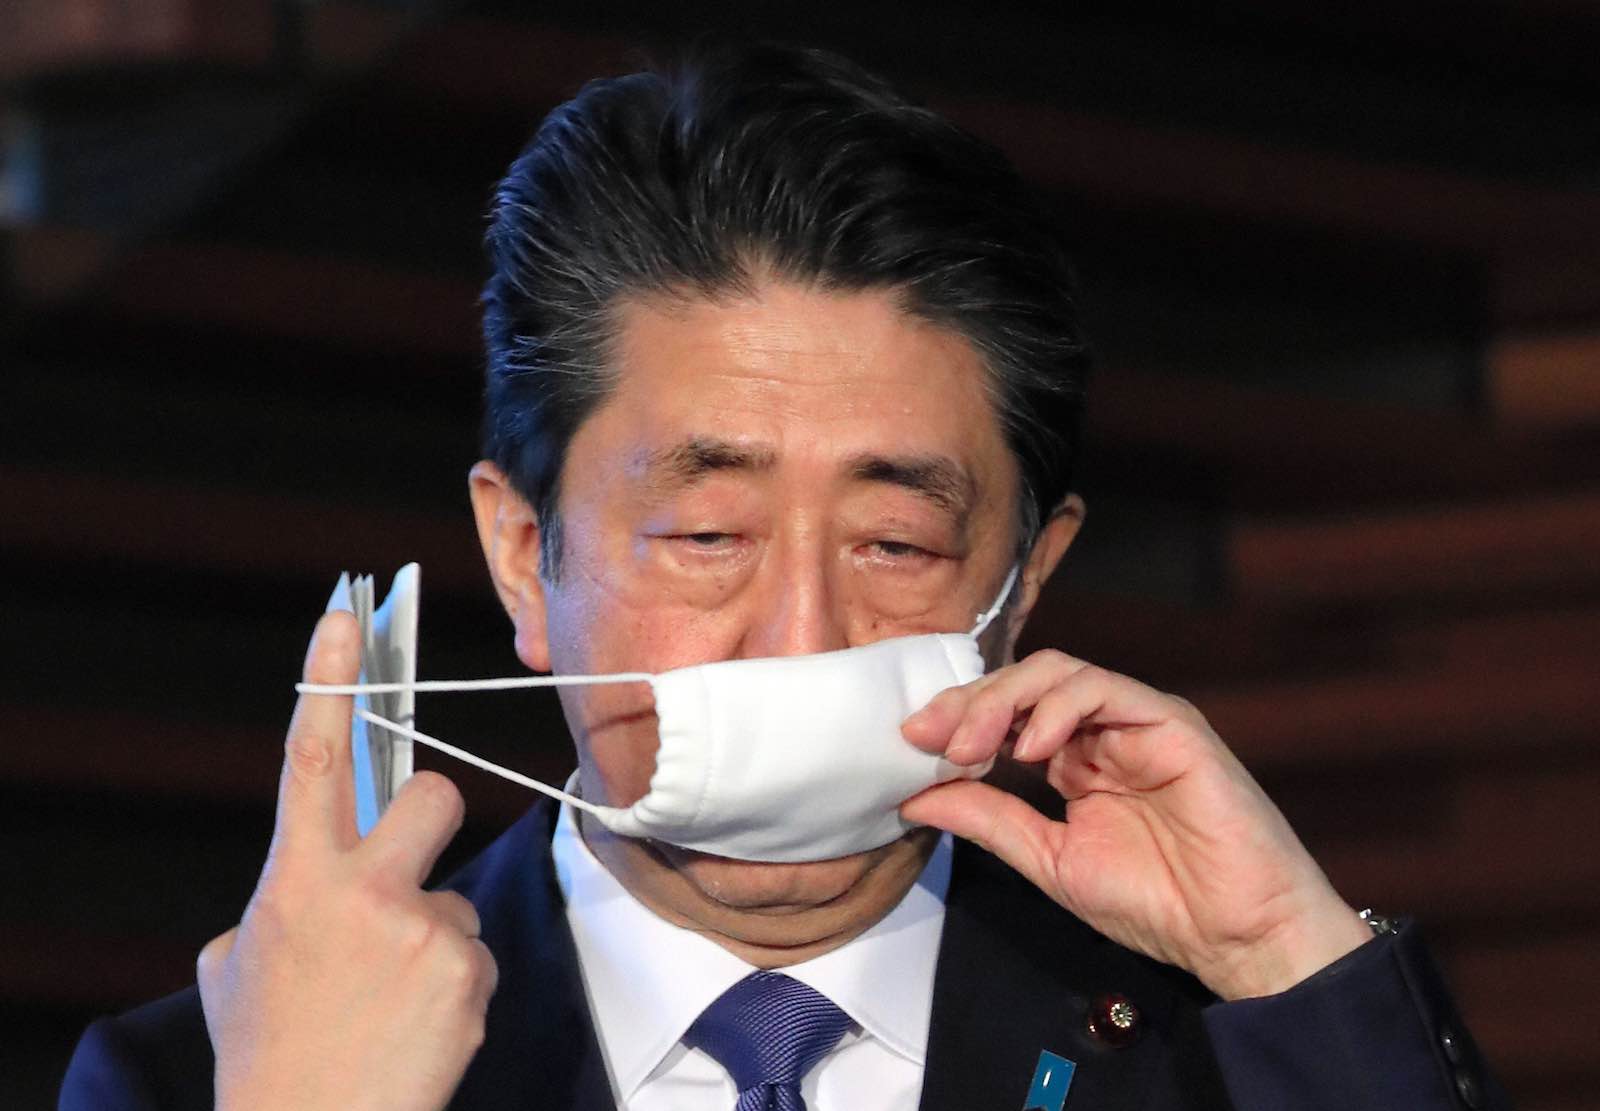 Japan’s Prime Minister Shinzo Abe removes his face mask as he speaks to media reporters prior to the coronavirus task force meeting on 6 April to announce he will declare a state of emergency (The Asahi Shimbun via Getty Images)